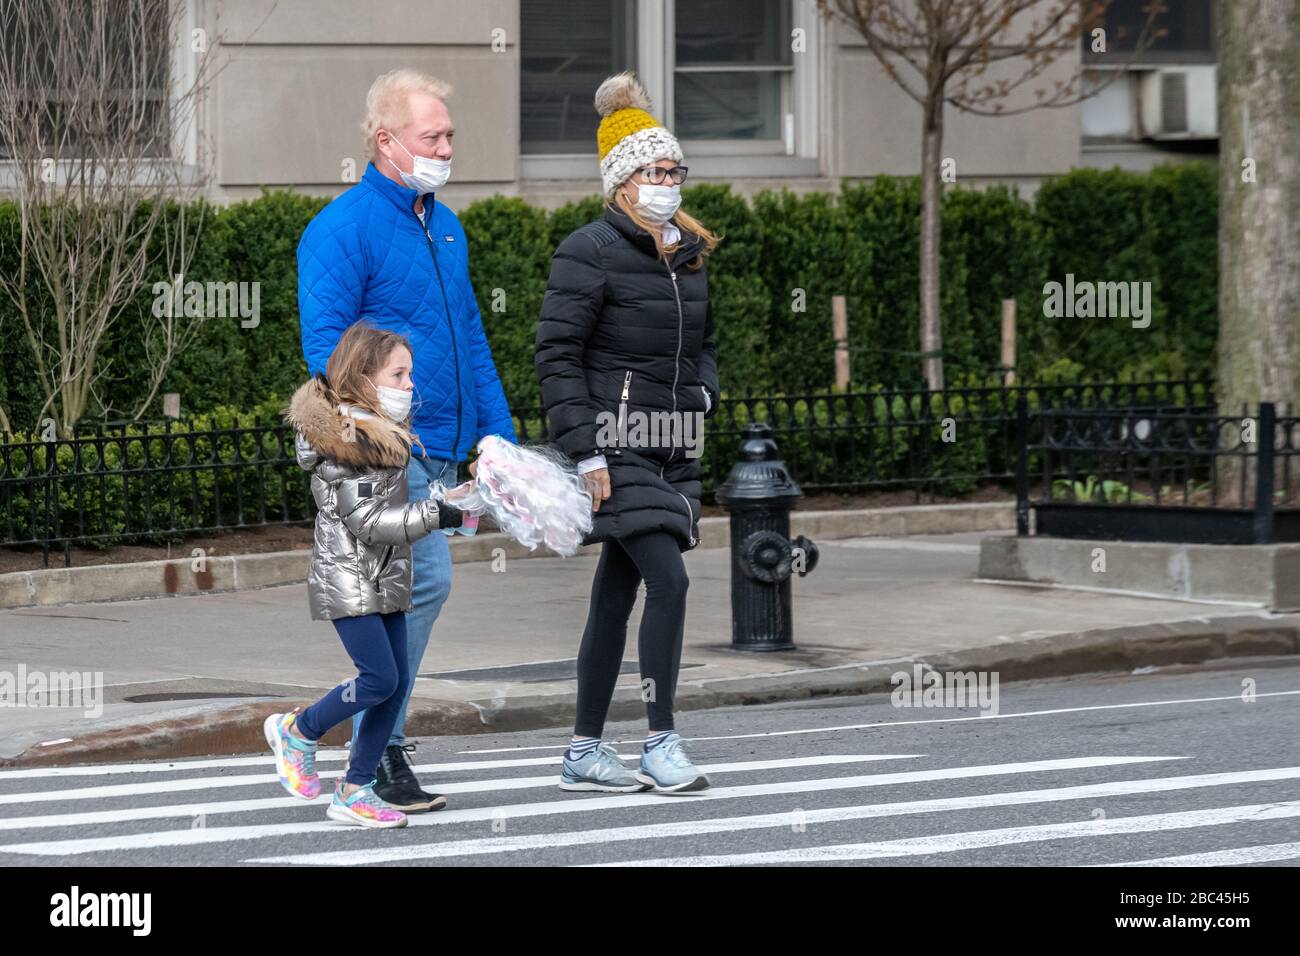 New York, USA. 2nd Apr, 2020. A family wears face masks as they go out for a stroll in New York City. Today the government said that Newyorkers should cover their faces when they go outside, to prevent coronavirus spread. Credit: Enrique Shore/Alamy Live News Stock Photo